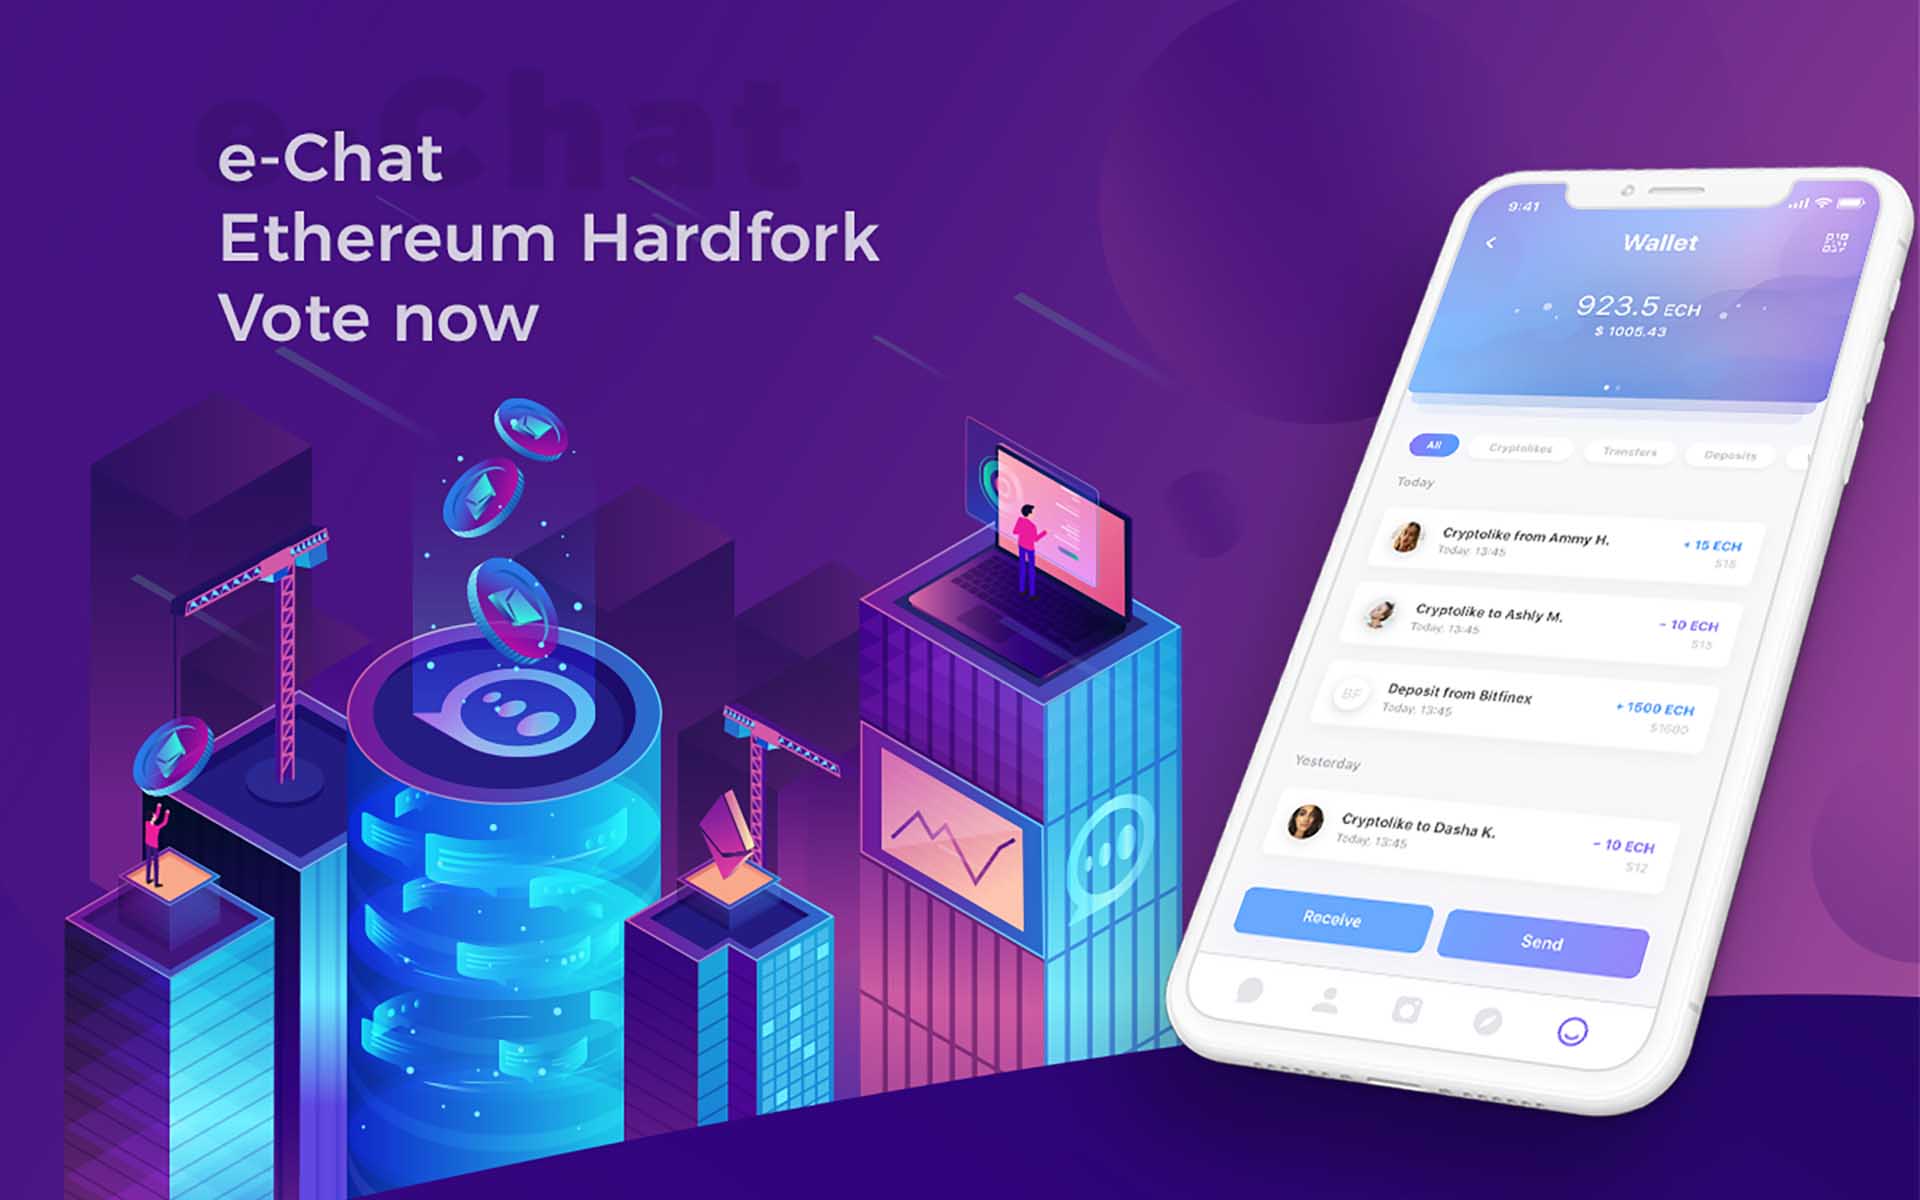 e-Chat can conduct Ethereum Hardfork after the ICO